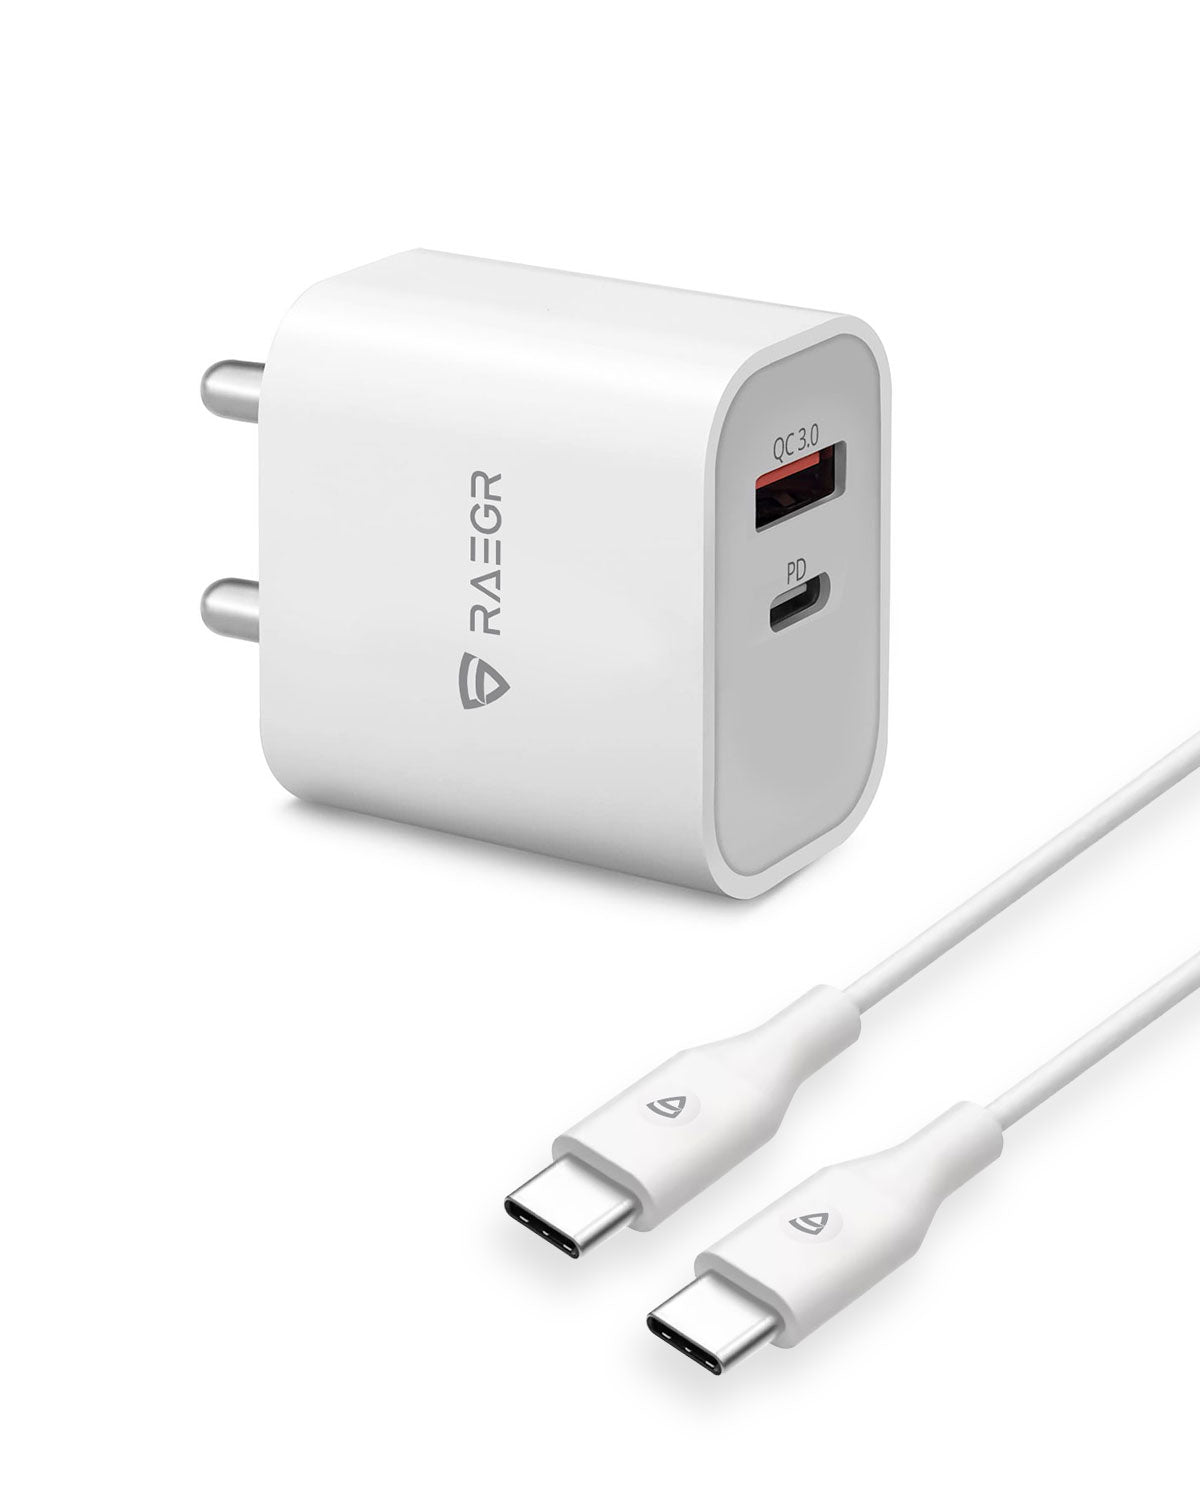 RAEGR RapidLink 250 20W Adapter |Made in India| PD+QC USB Wall Charger